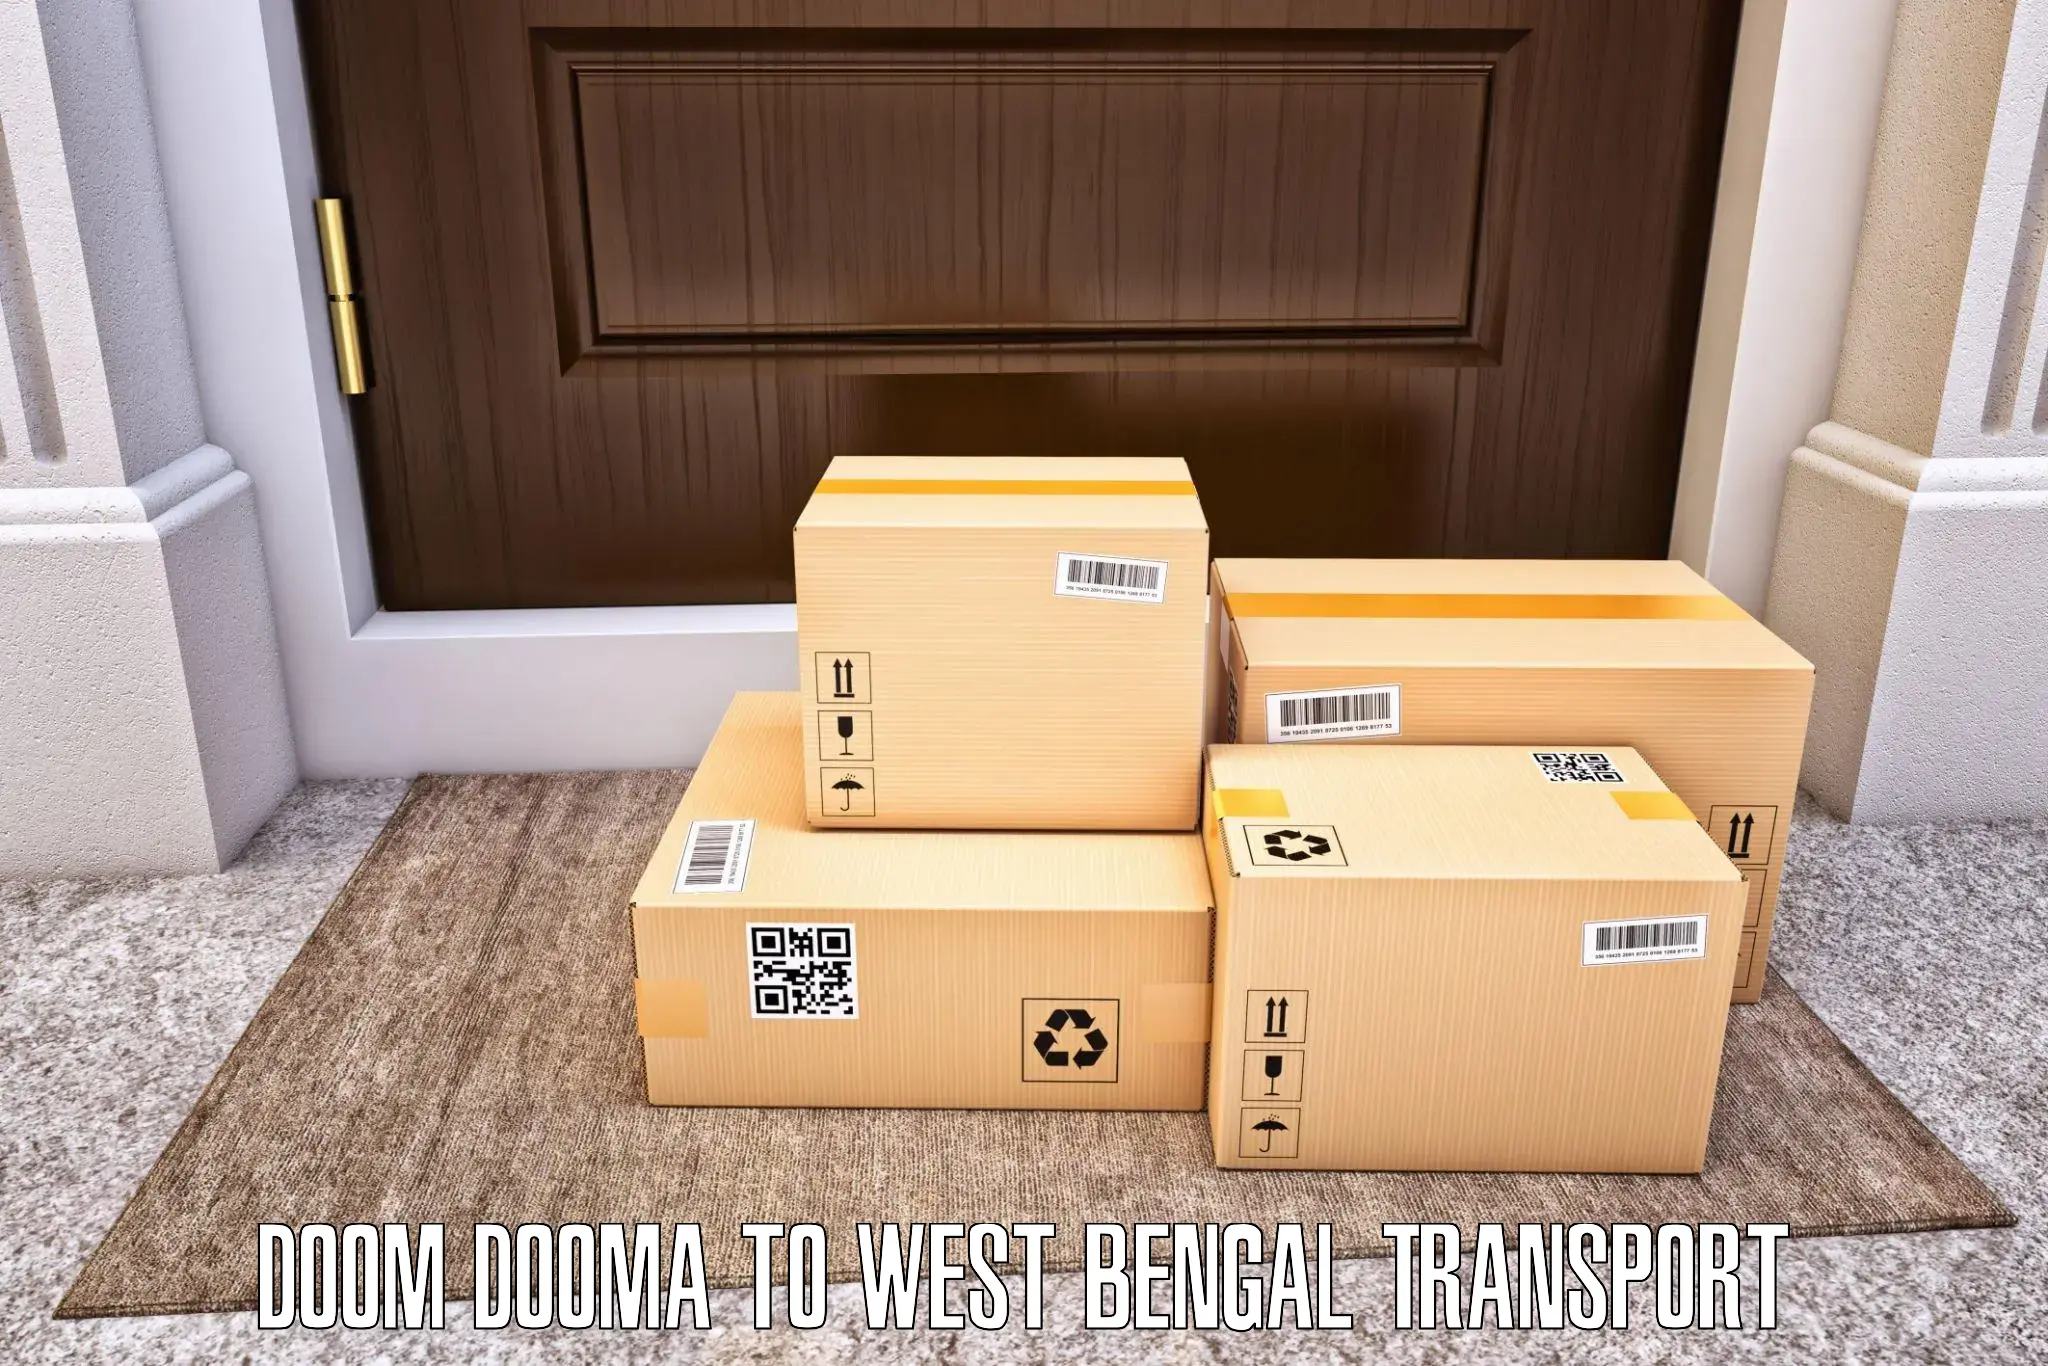 Two wheeler transport services Doom Dooma to West Bengal